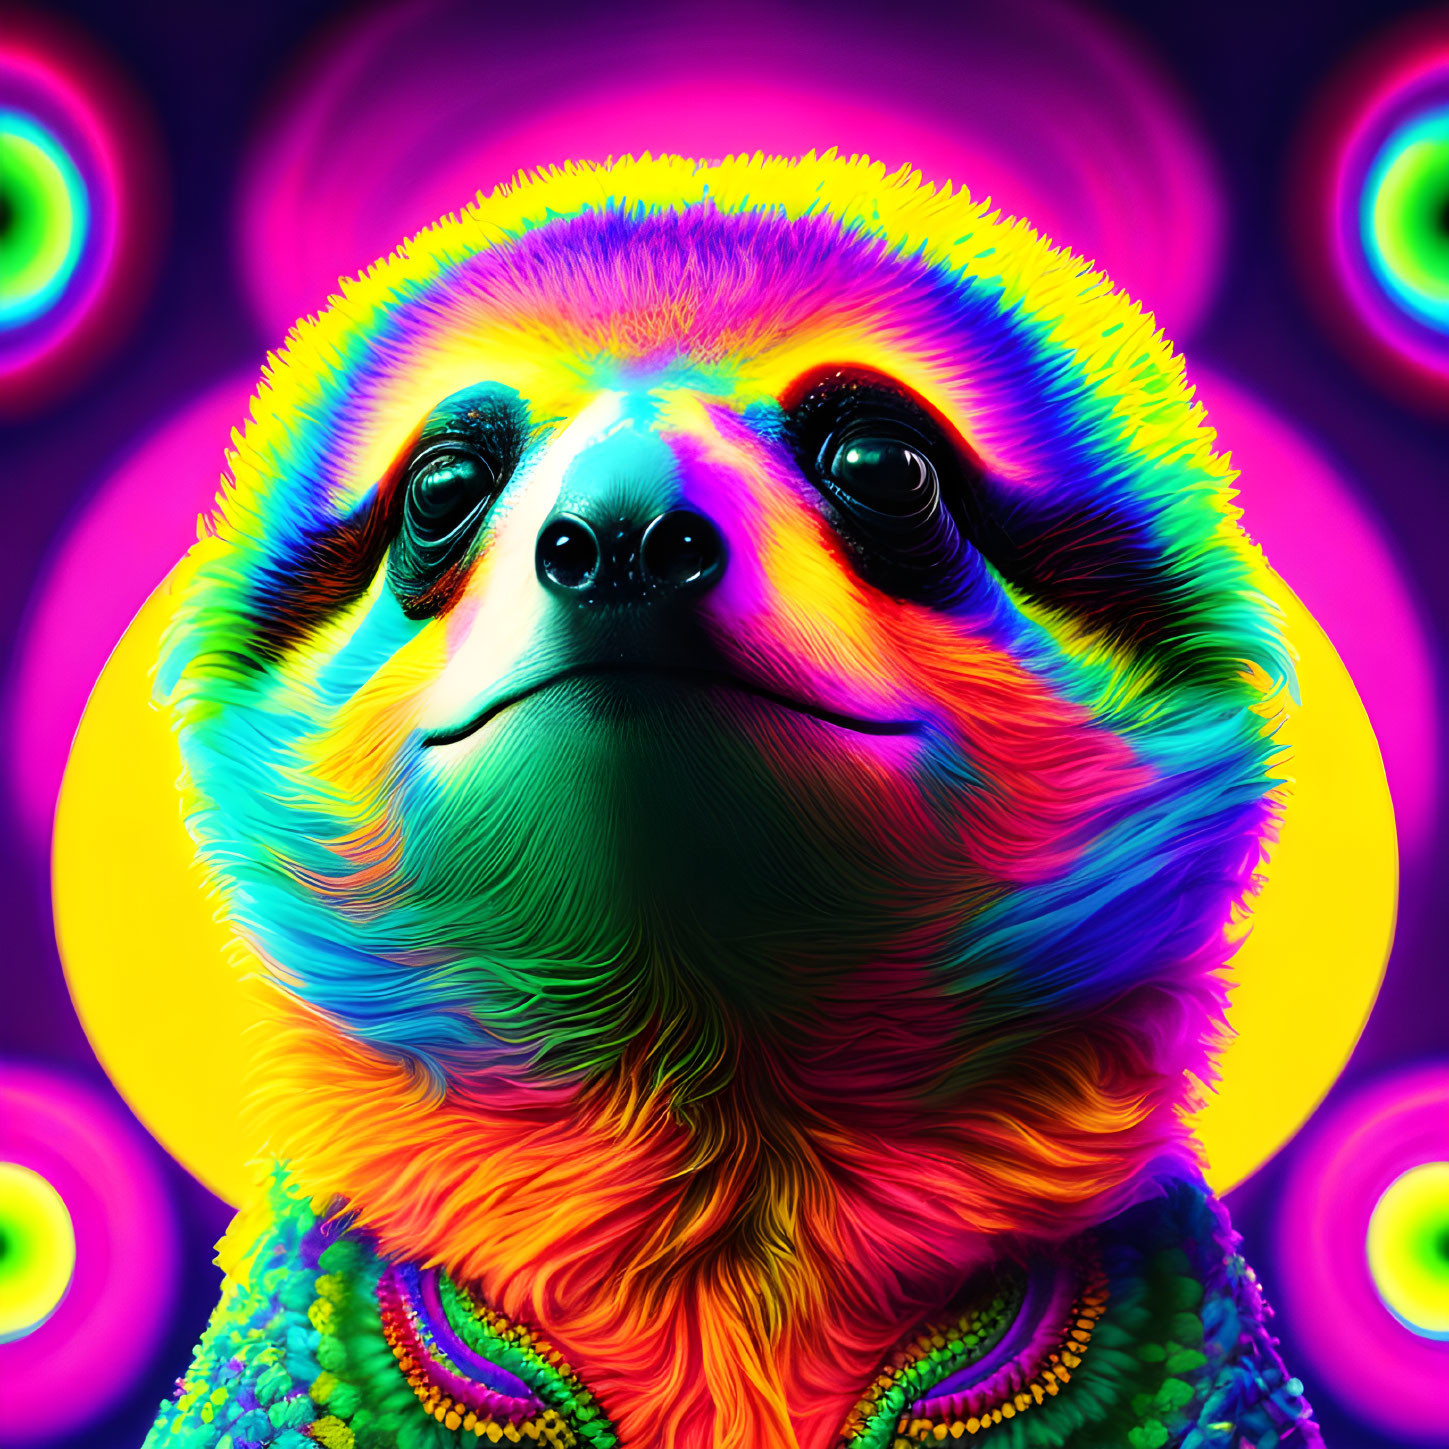 Colorful Psychedelic Rainbow Sloth on Concentric Circles